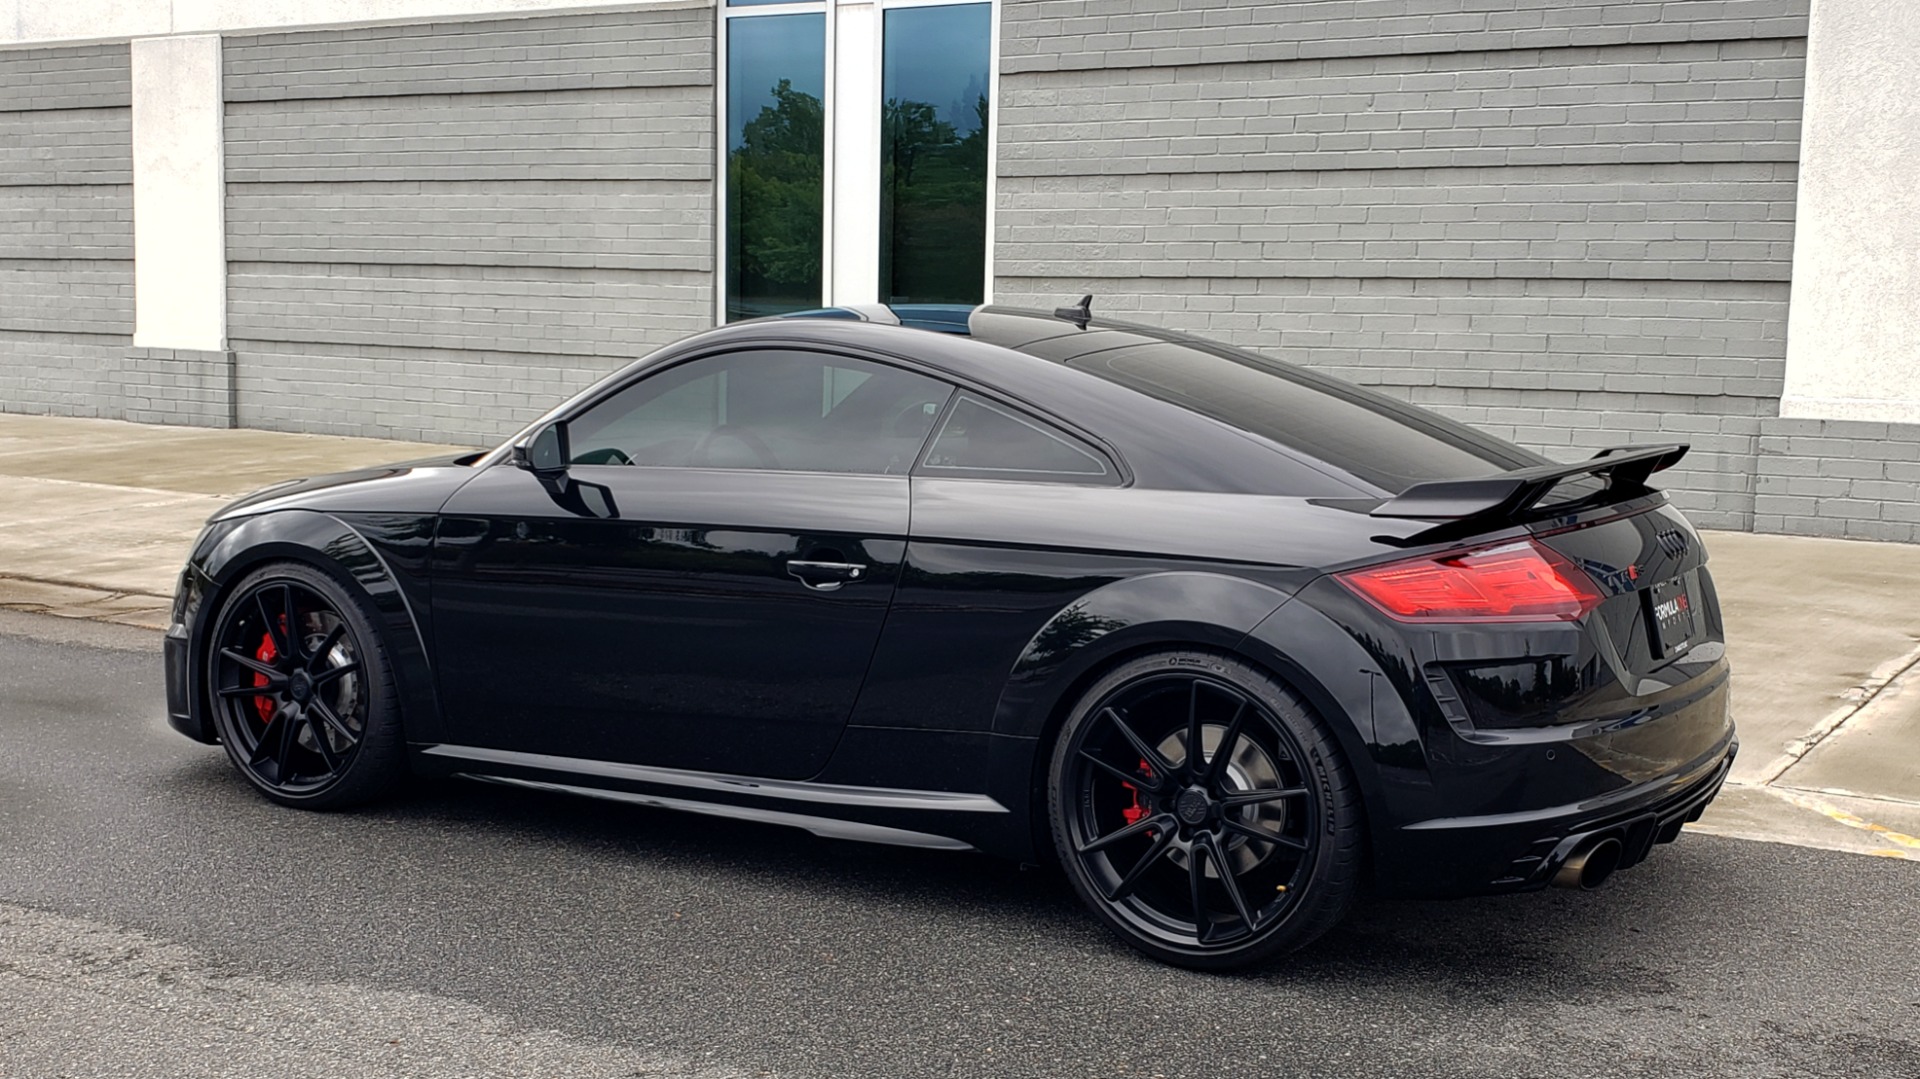 Used 2019 Audi TT RS 2.5L / QUATTRO / RS DESIGN / TECH / DYNAMIC / BLACK OPTIC / CARB for sale Sold at Formula Imports in Charlotte NC 28227 7